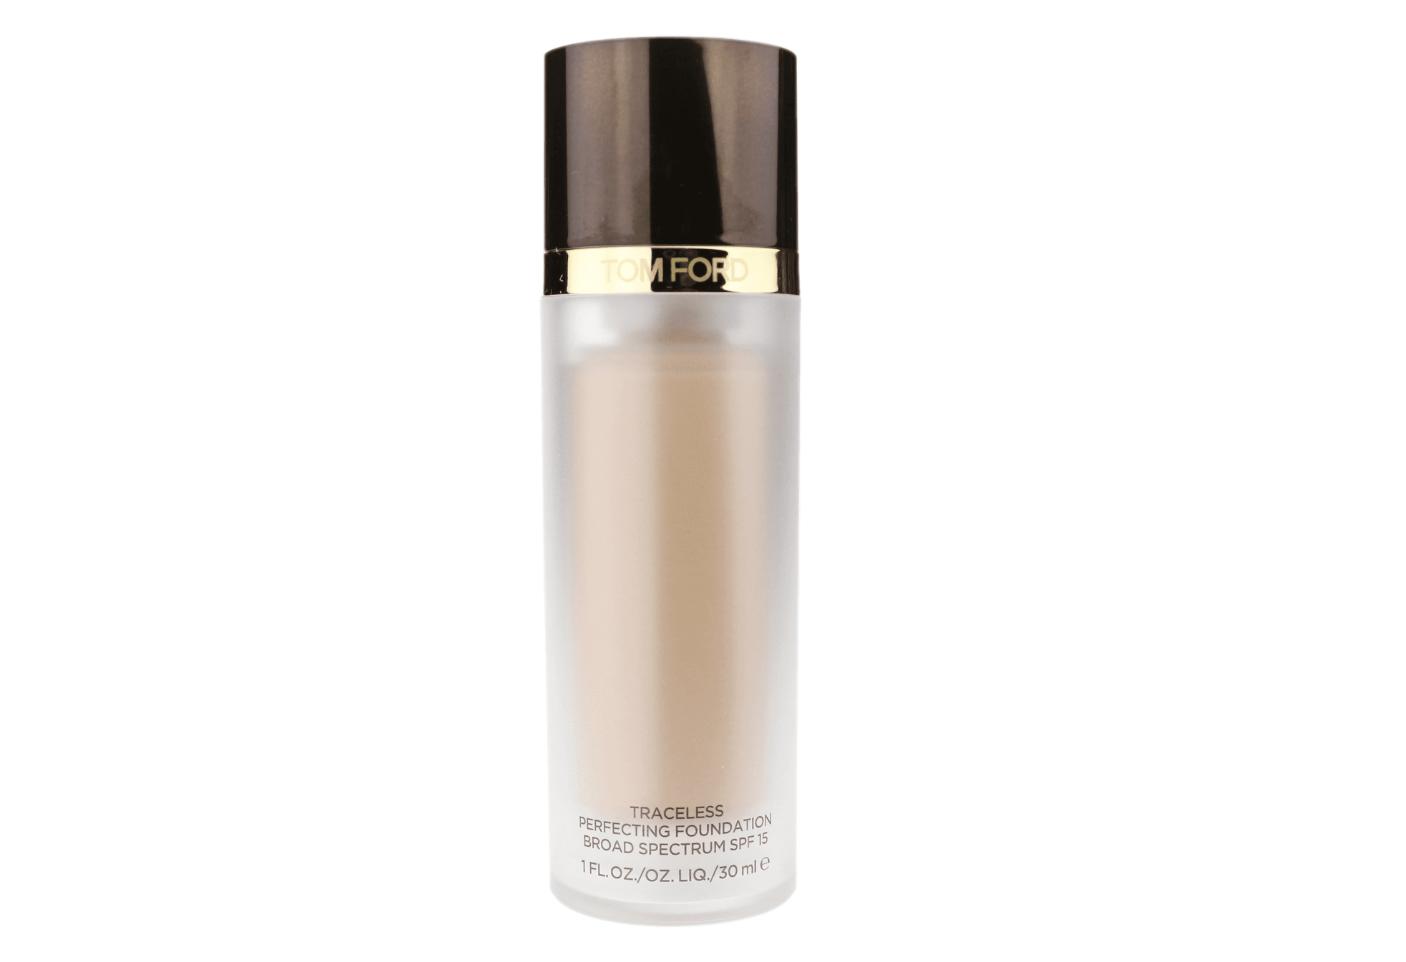 Tom Ford Traceless Perfecting Foundation SPF15 Vellum 2.7